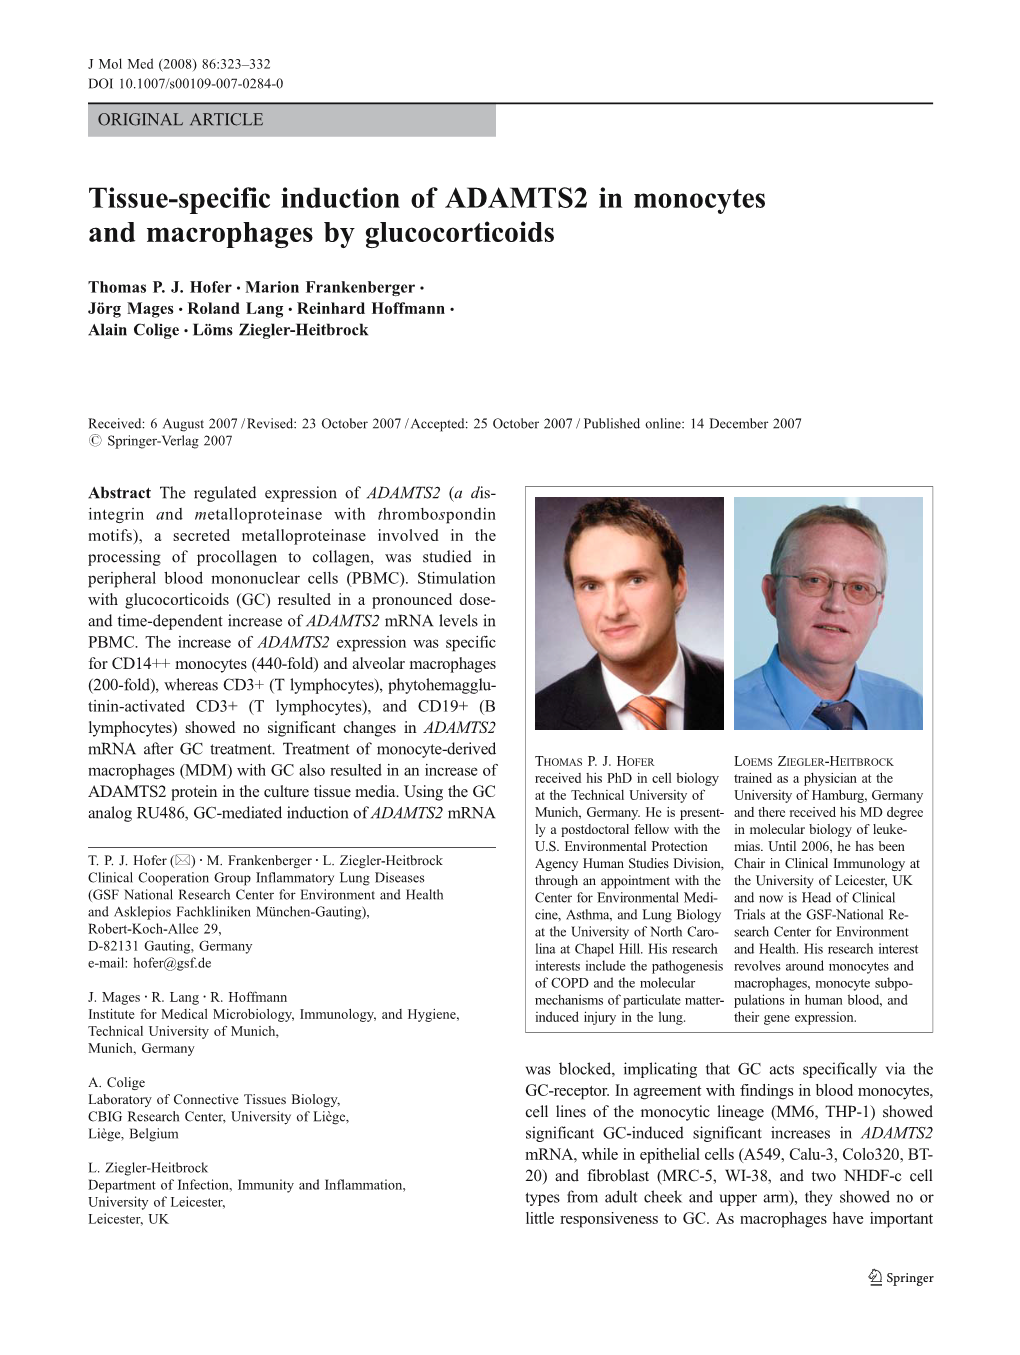 Tissue-Specific Induction of ADAMTS2 in Monocytes and Macrophages by Glucocorticoids